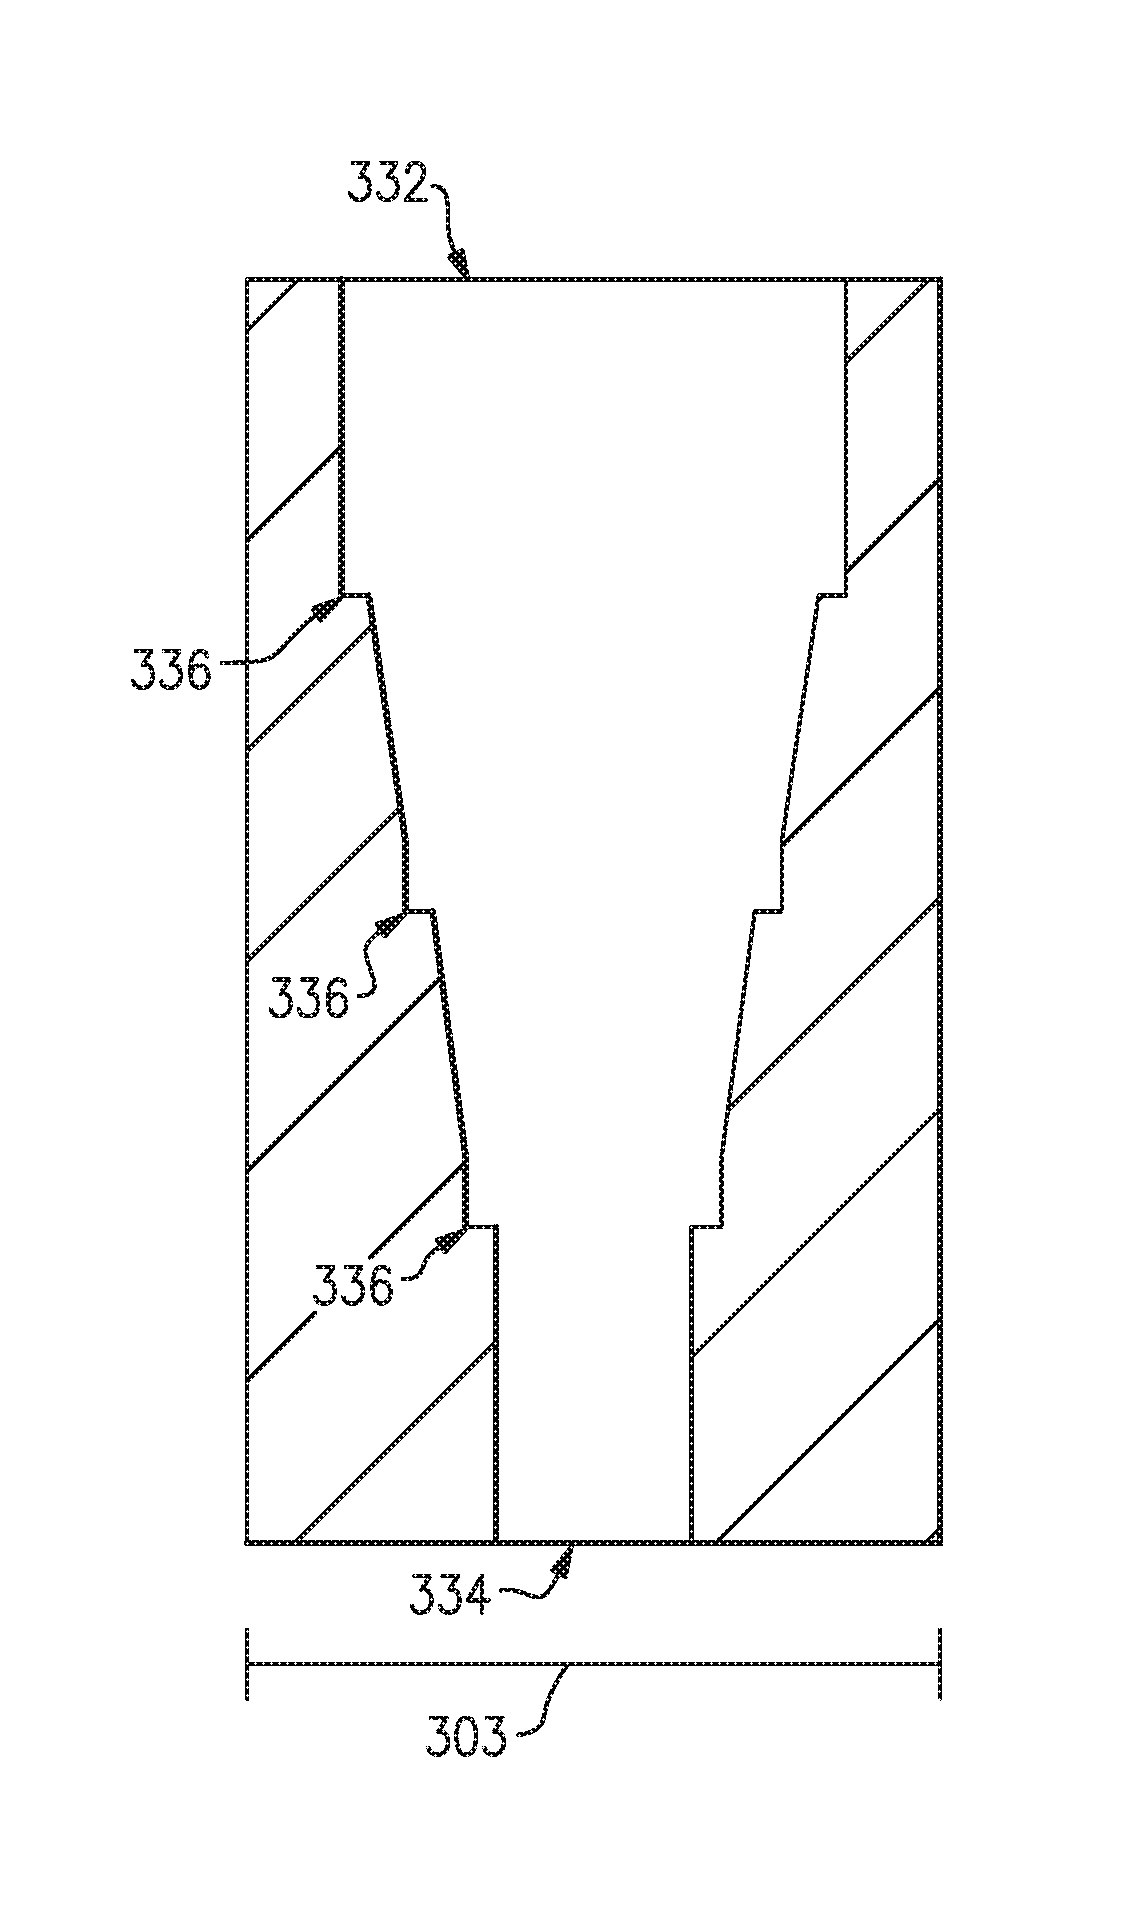 Ceramic filter using stepped impedance resonators having an inner cavity with at least one step and taper